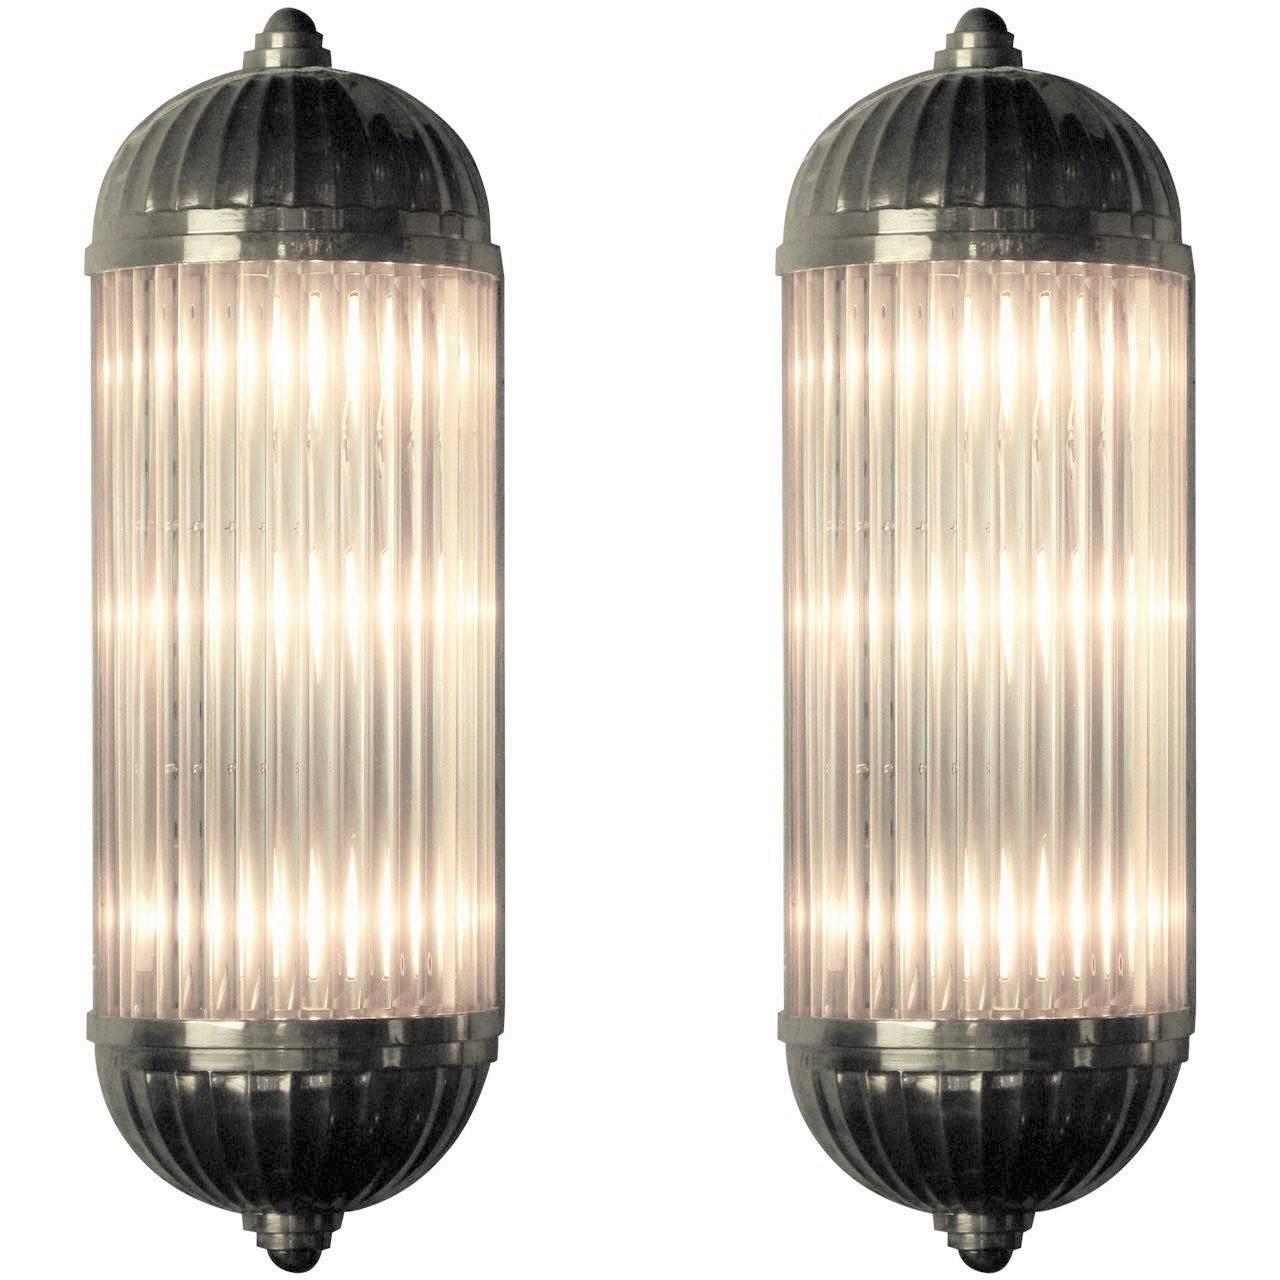 Multiple pairs available. Can be sold individually, price listed is for one single sconce.
French Modernist tubular sconce featuring long solid clear glass tubular rods that form a half cylinder shaped column, mounted in heavily cast polished